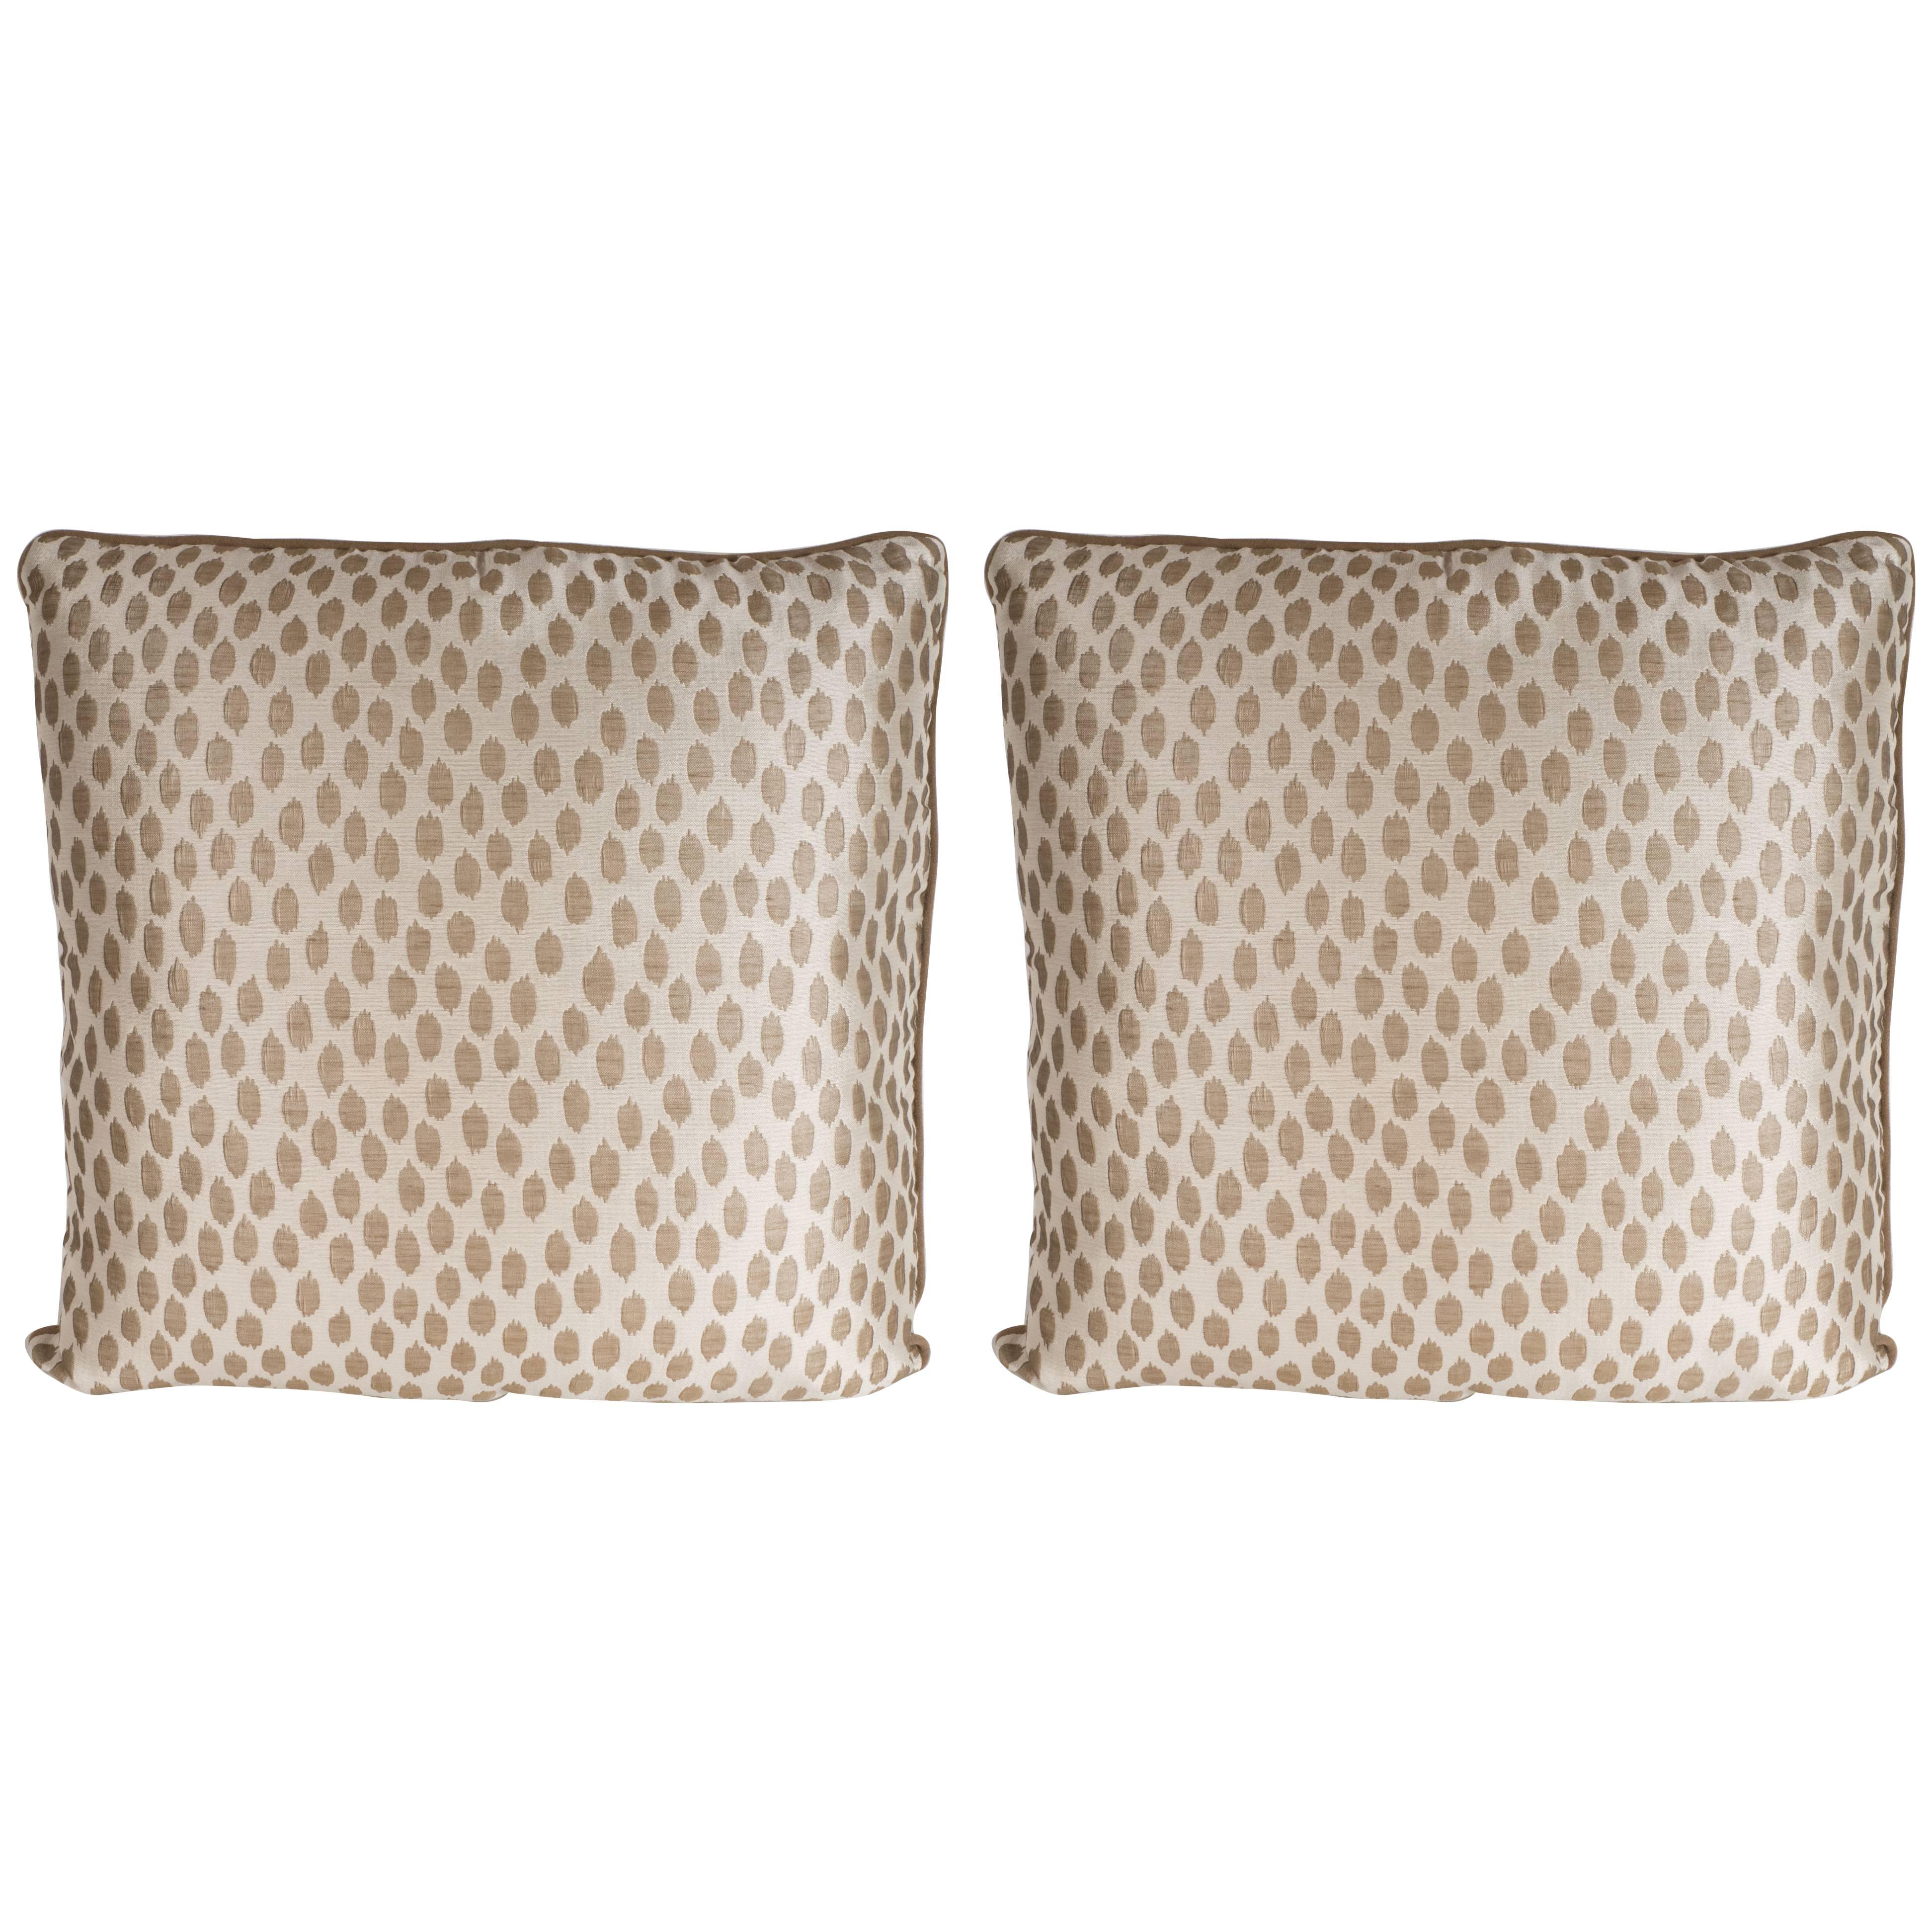 Pair of Modernist Square Pillows in Ecru and Muted Gold Tones with Piping Detail For Sale